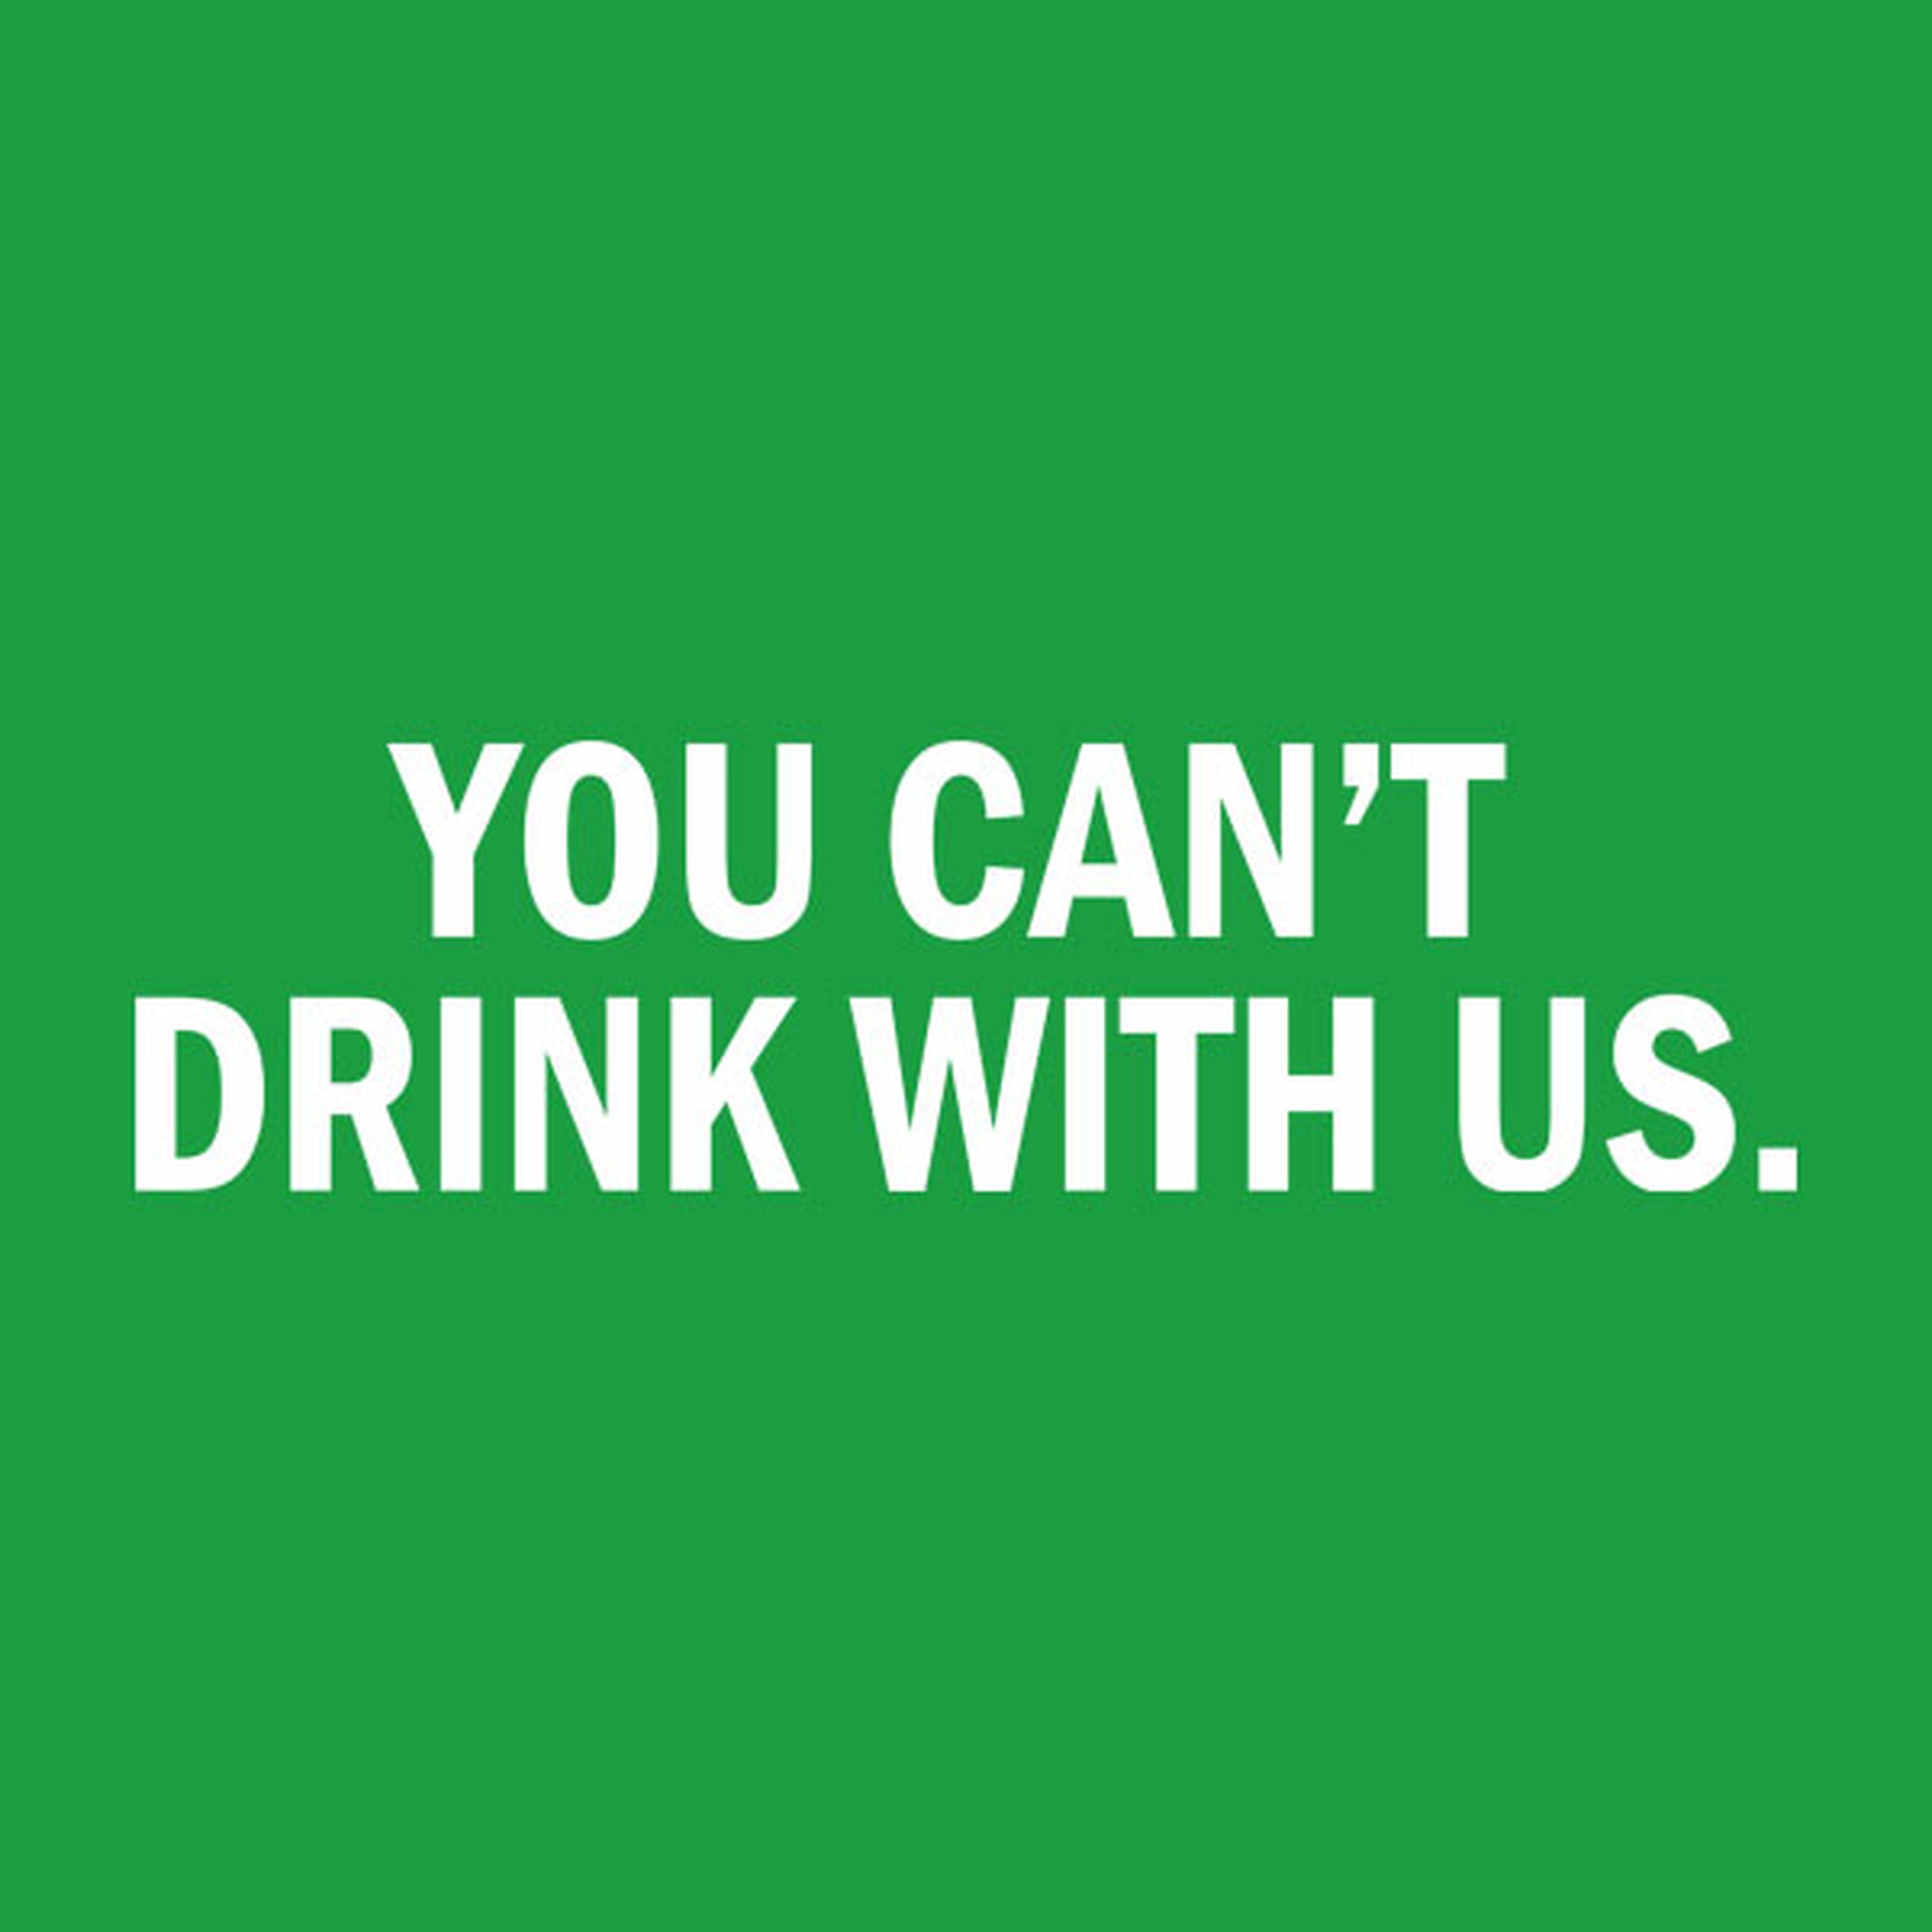 You can't drink with us